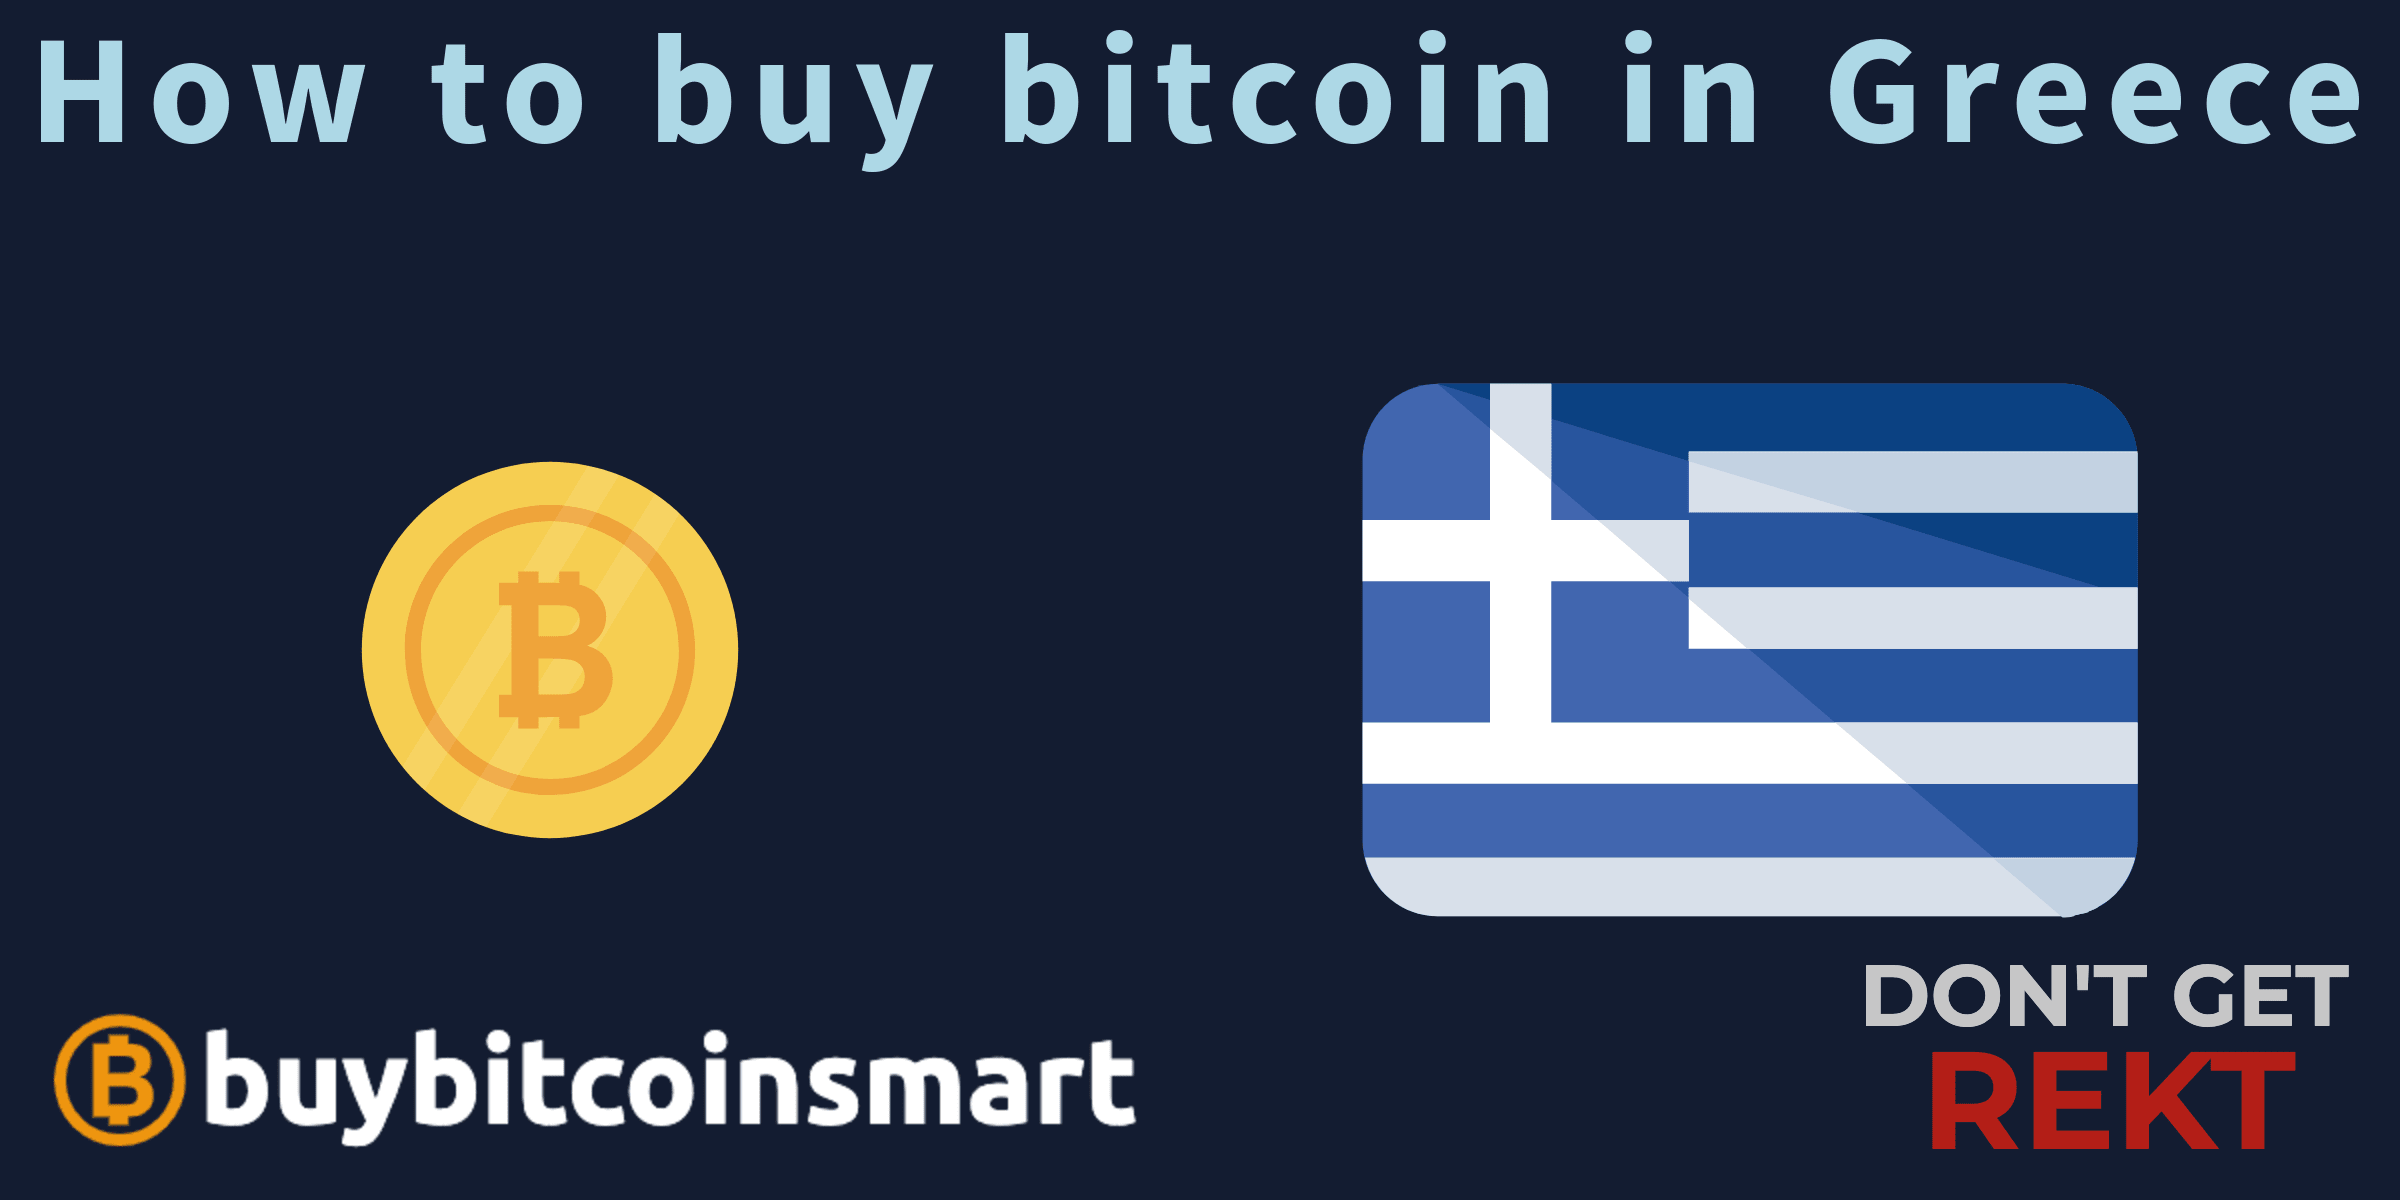 How to buy bitcoin in Greece